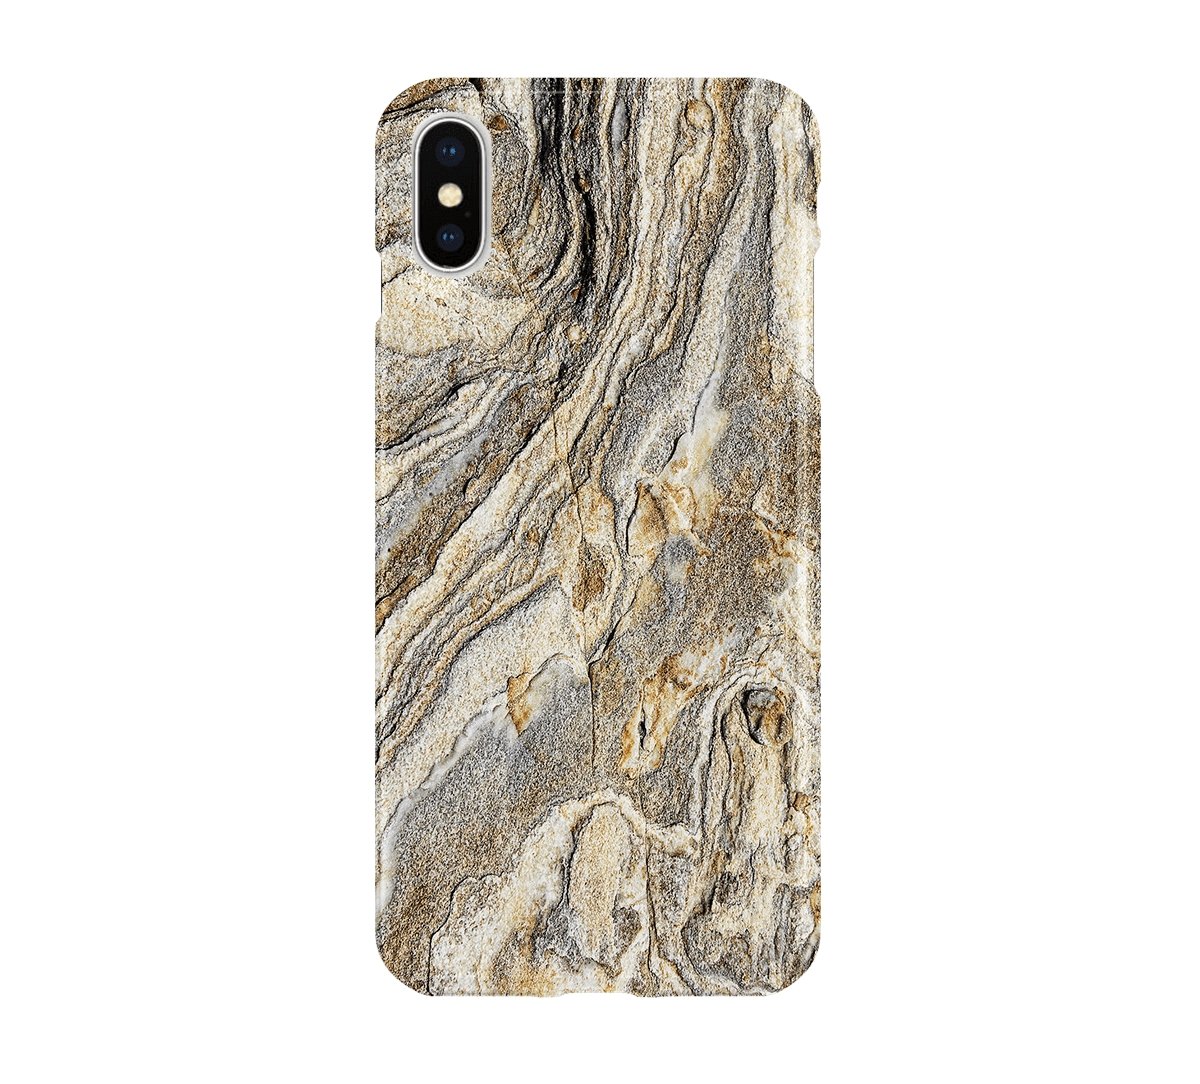 Rough Stone - iPhone phone case designs by CaseSwagger